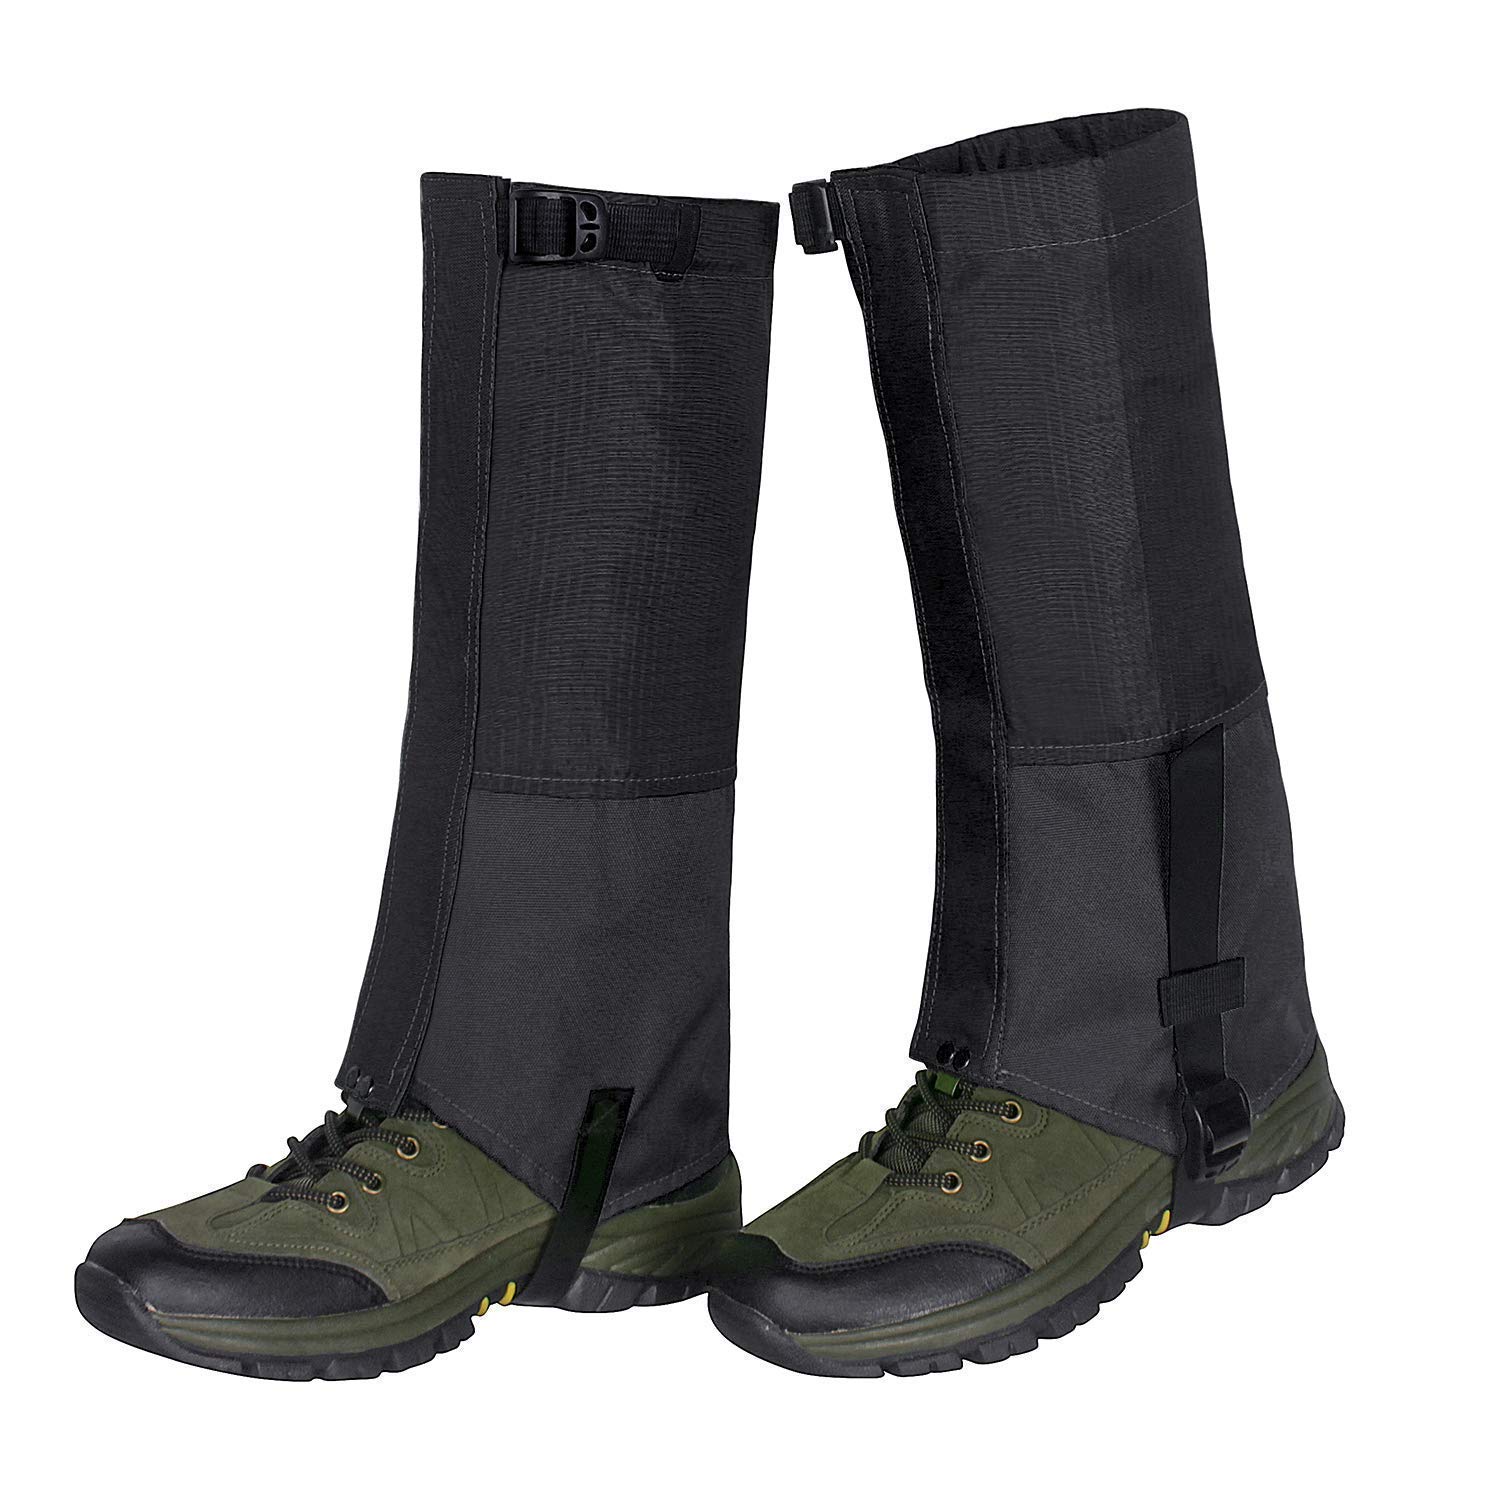 Top 10 Best Gaiters for Snowshoeing - Top Value Reviews